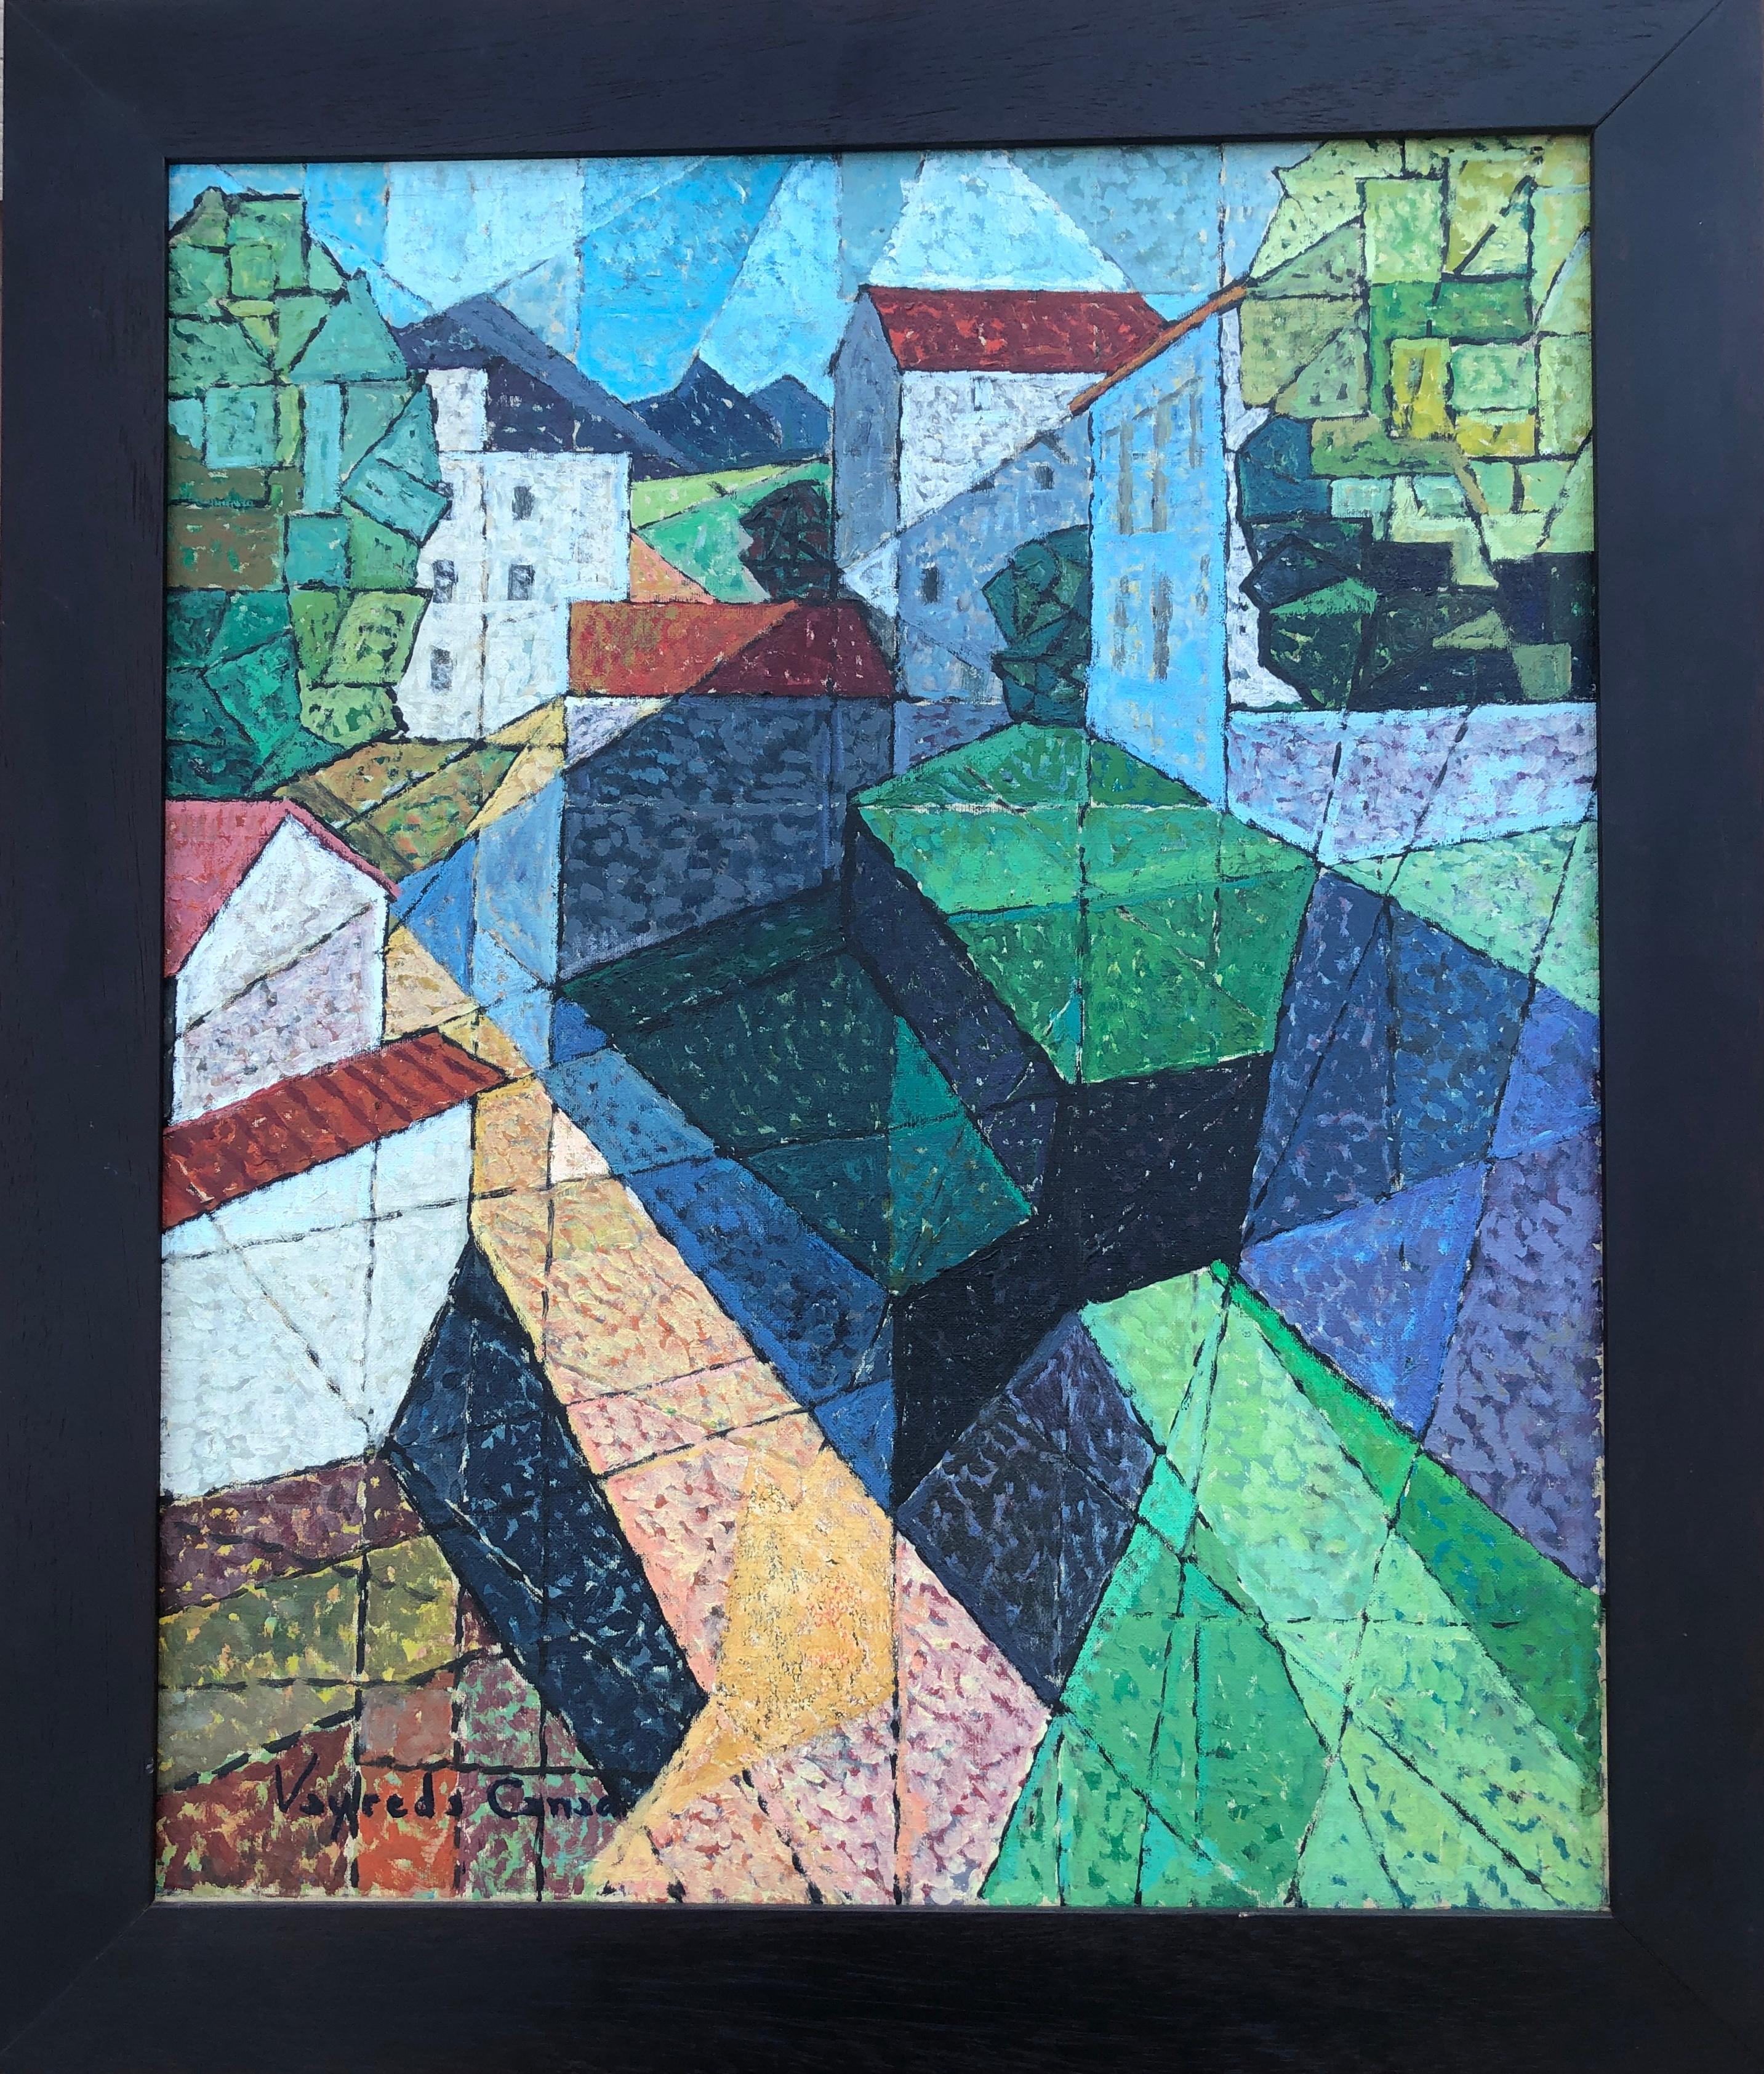 Spanish town cubist oil on canvas painting spain - Painting by Josep Maria Vayreda Canadell